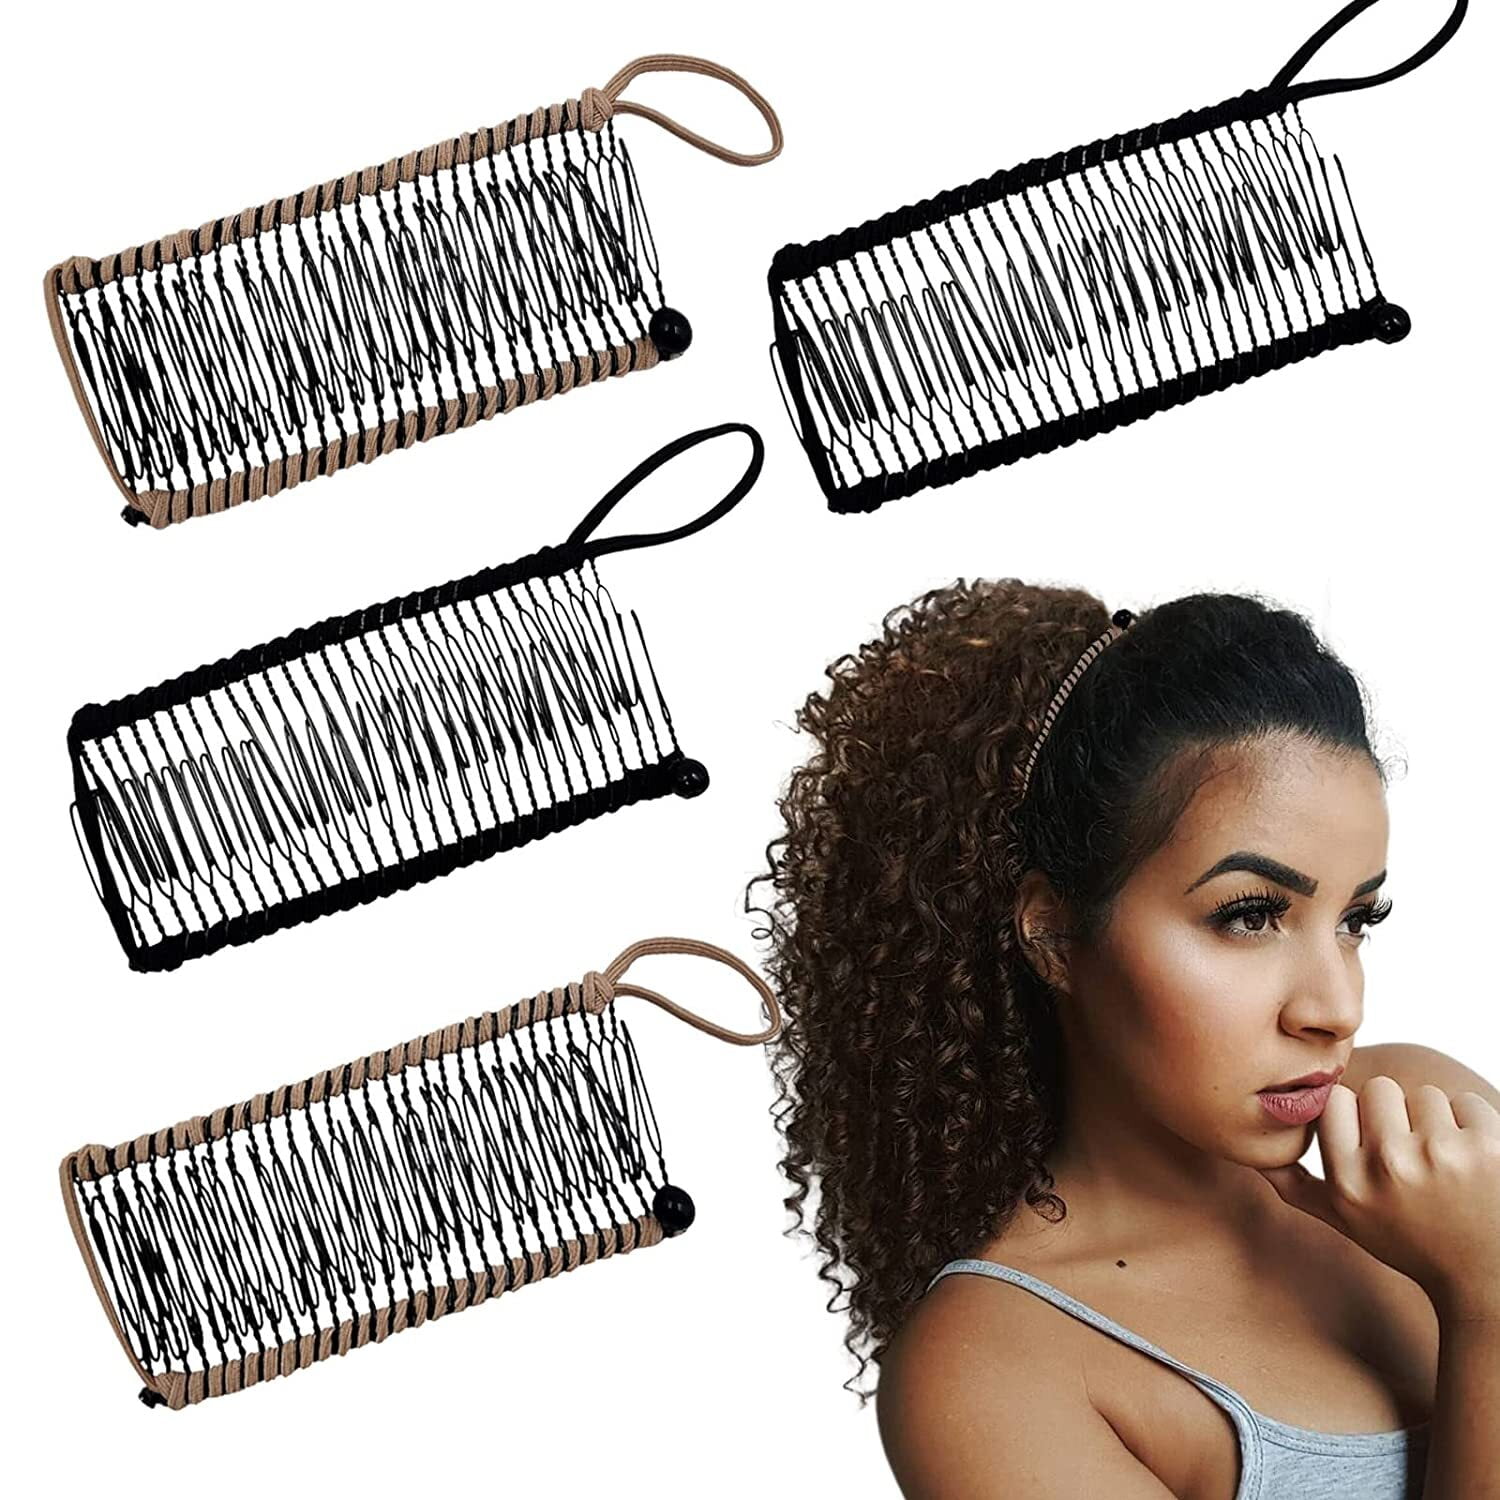 Stretchy Banana Hair Clip Vintage Clincher Comb Tool for Thick Thin Curly  Hair Stretch & Adjust - Decorative Sturdy & Lightweight - No Pressure or